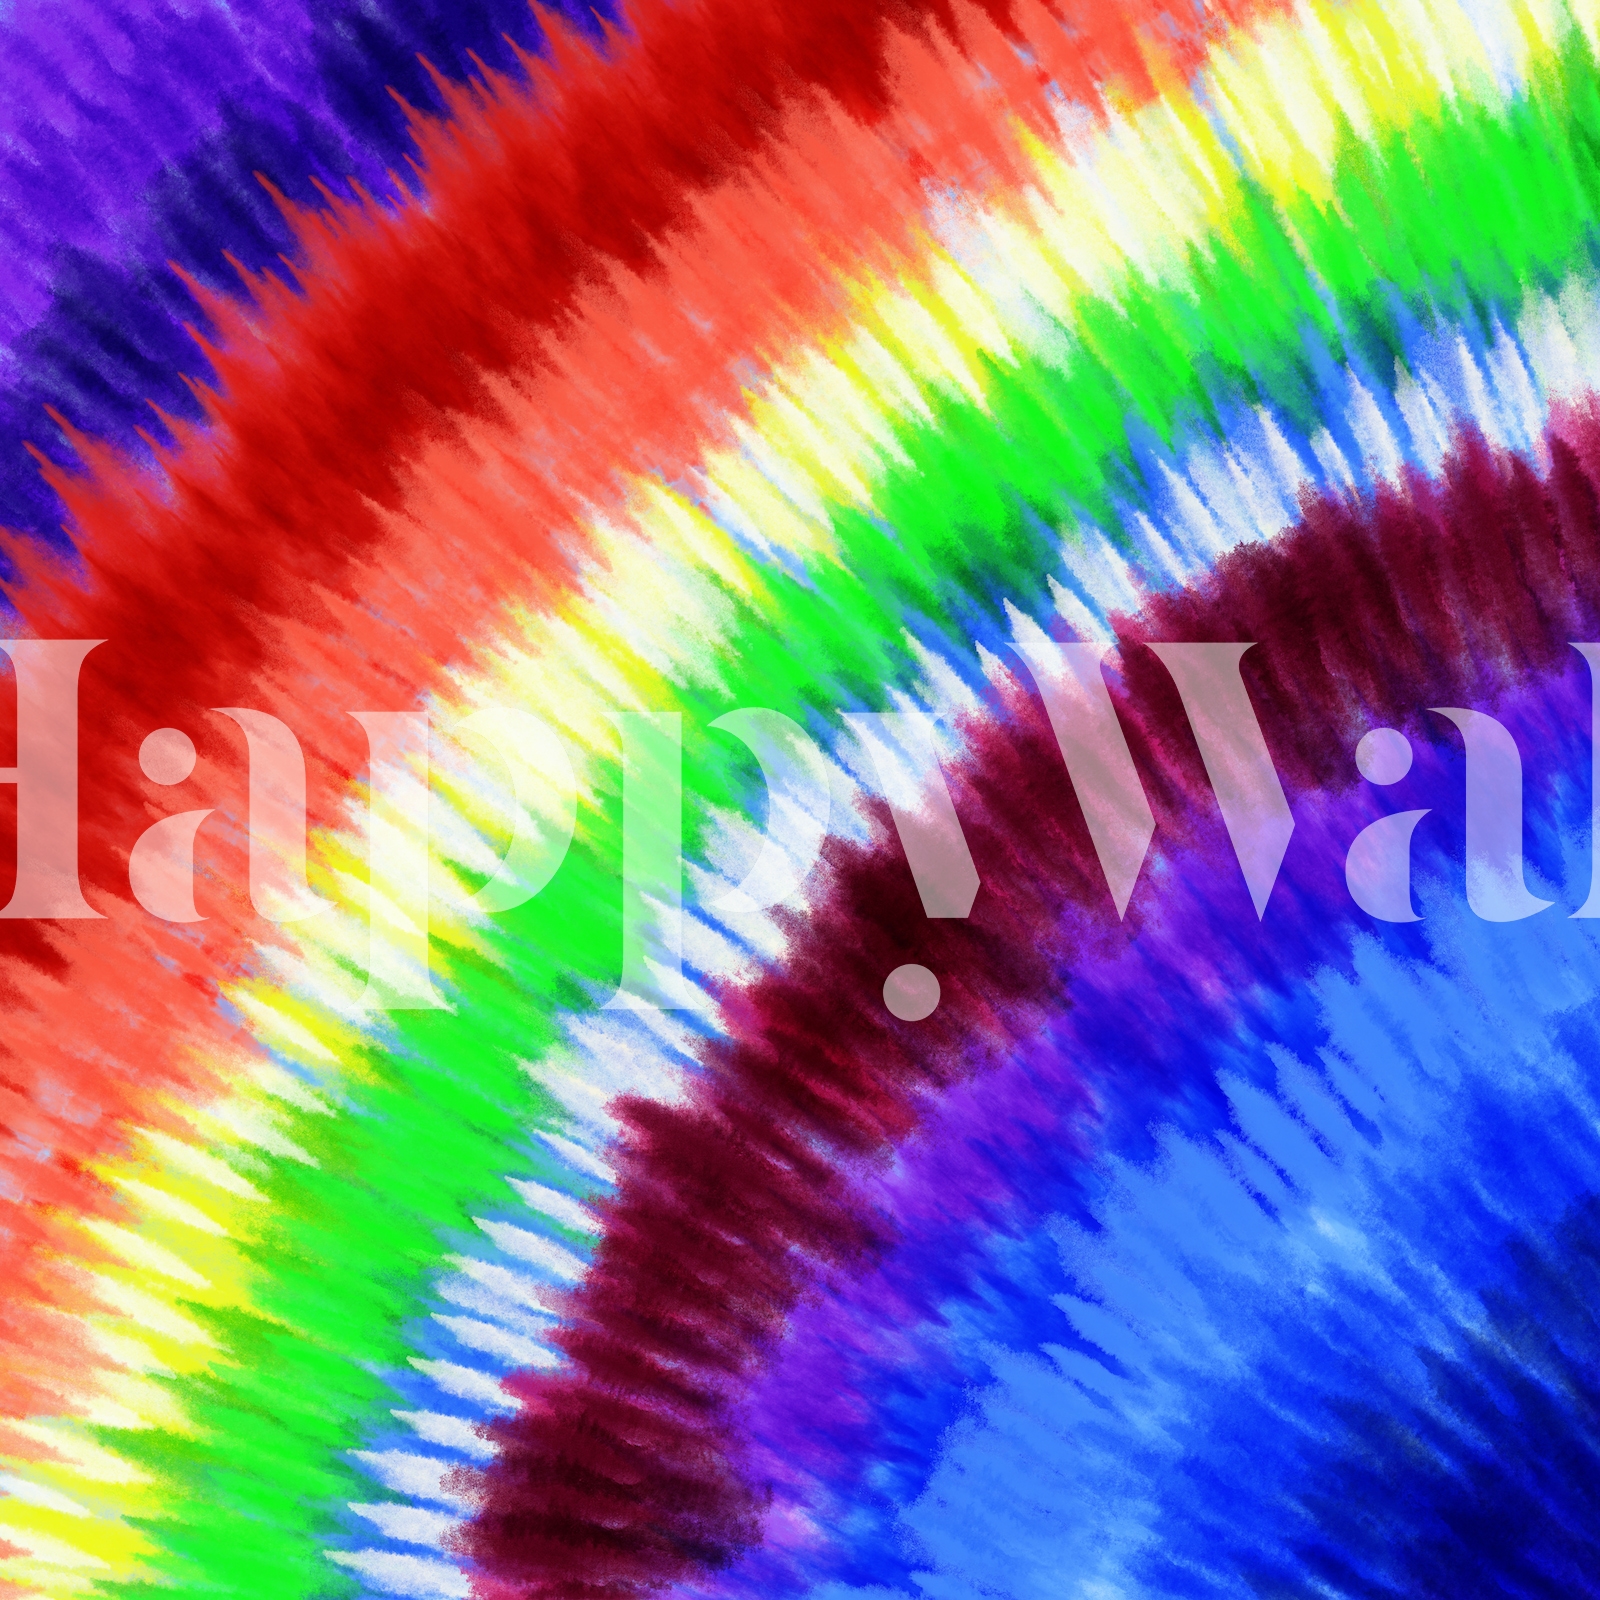 Tie Dye Background 14 Wallpaper Colorful And Vibrant Happywall 